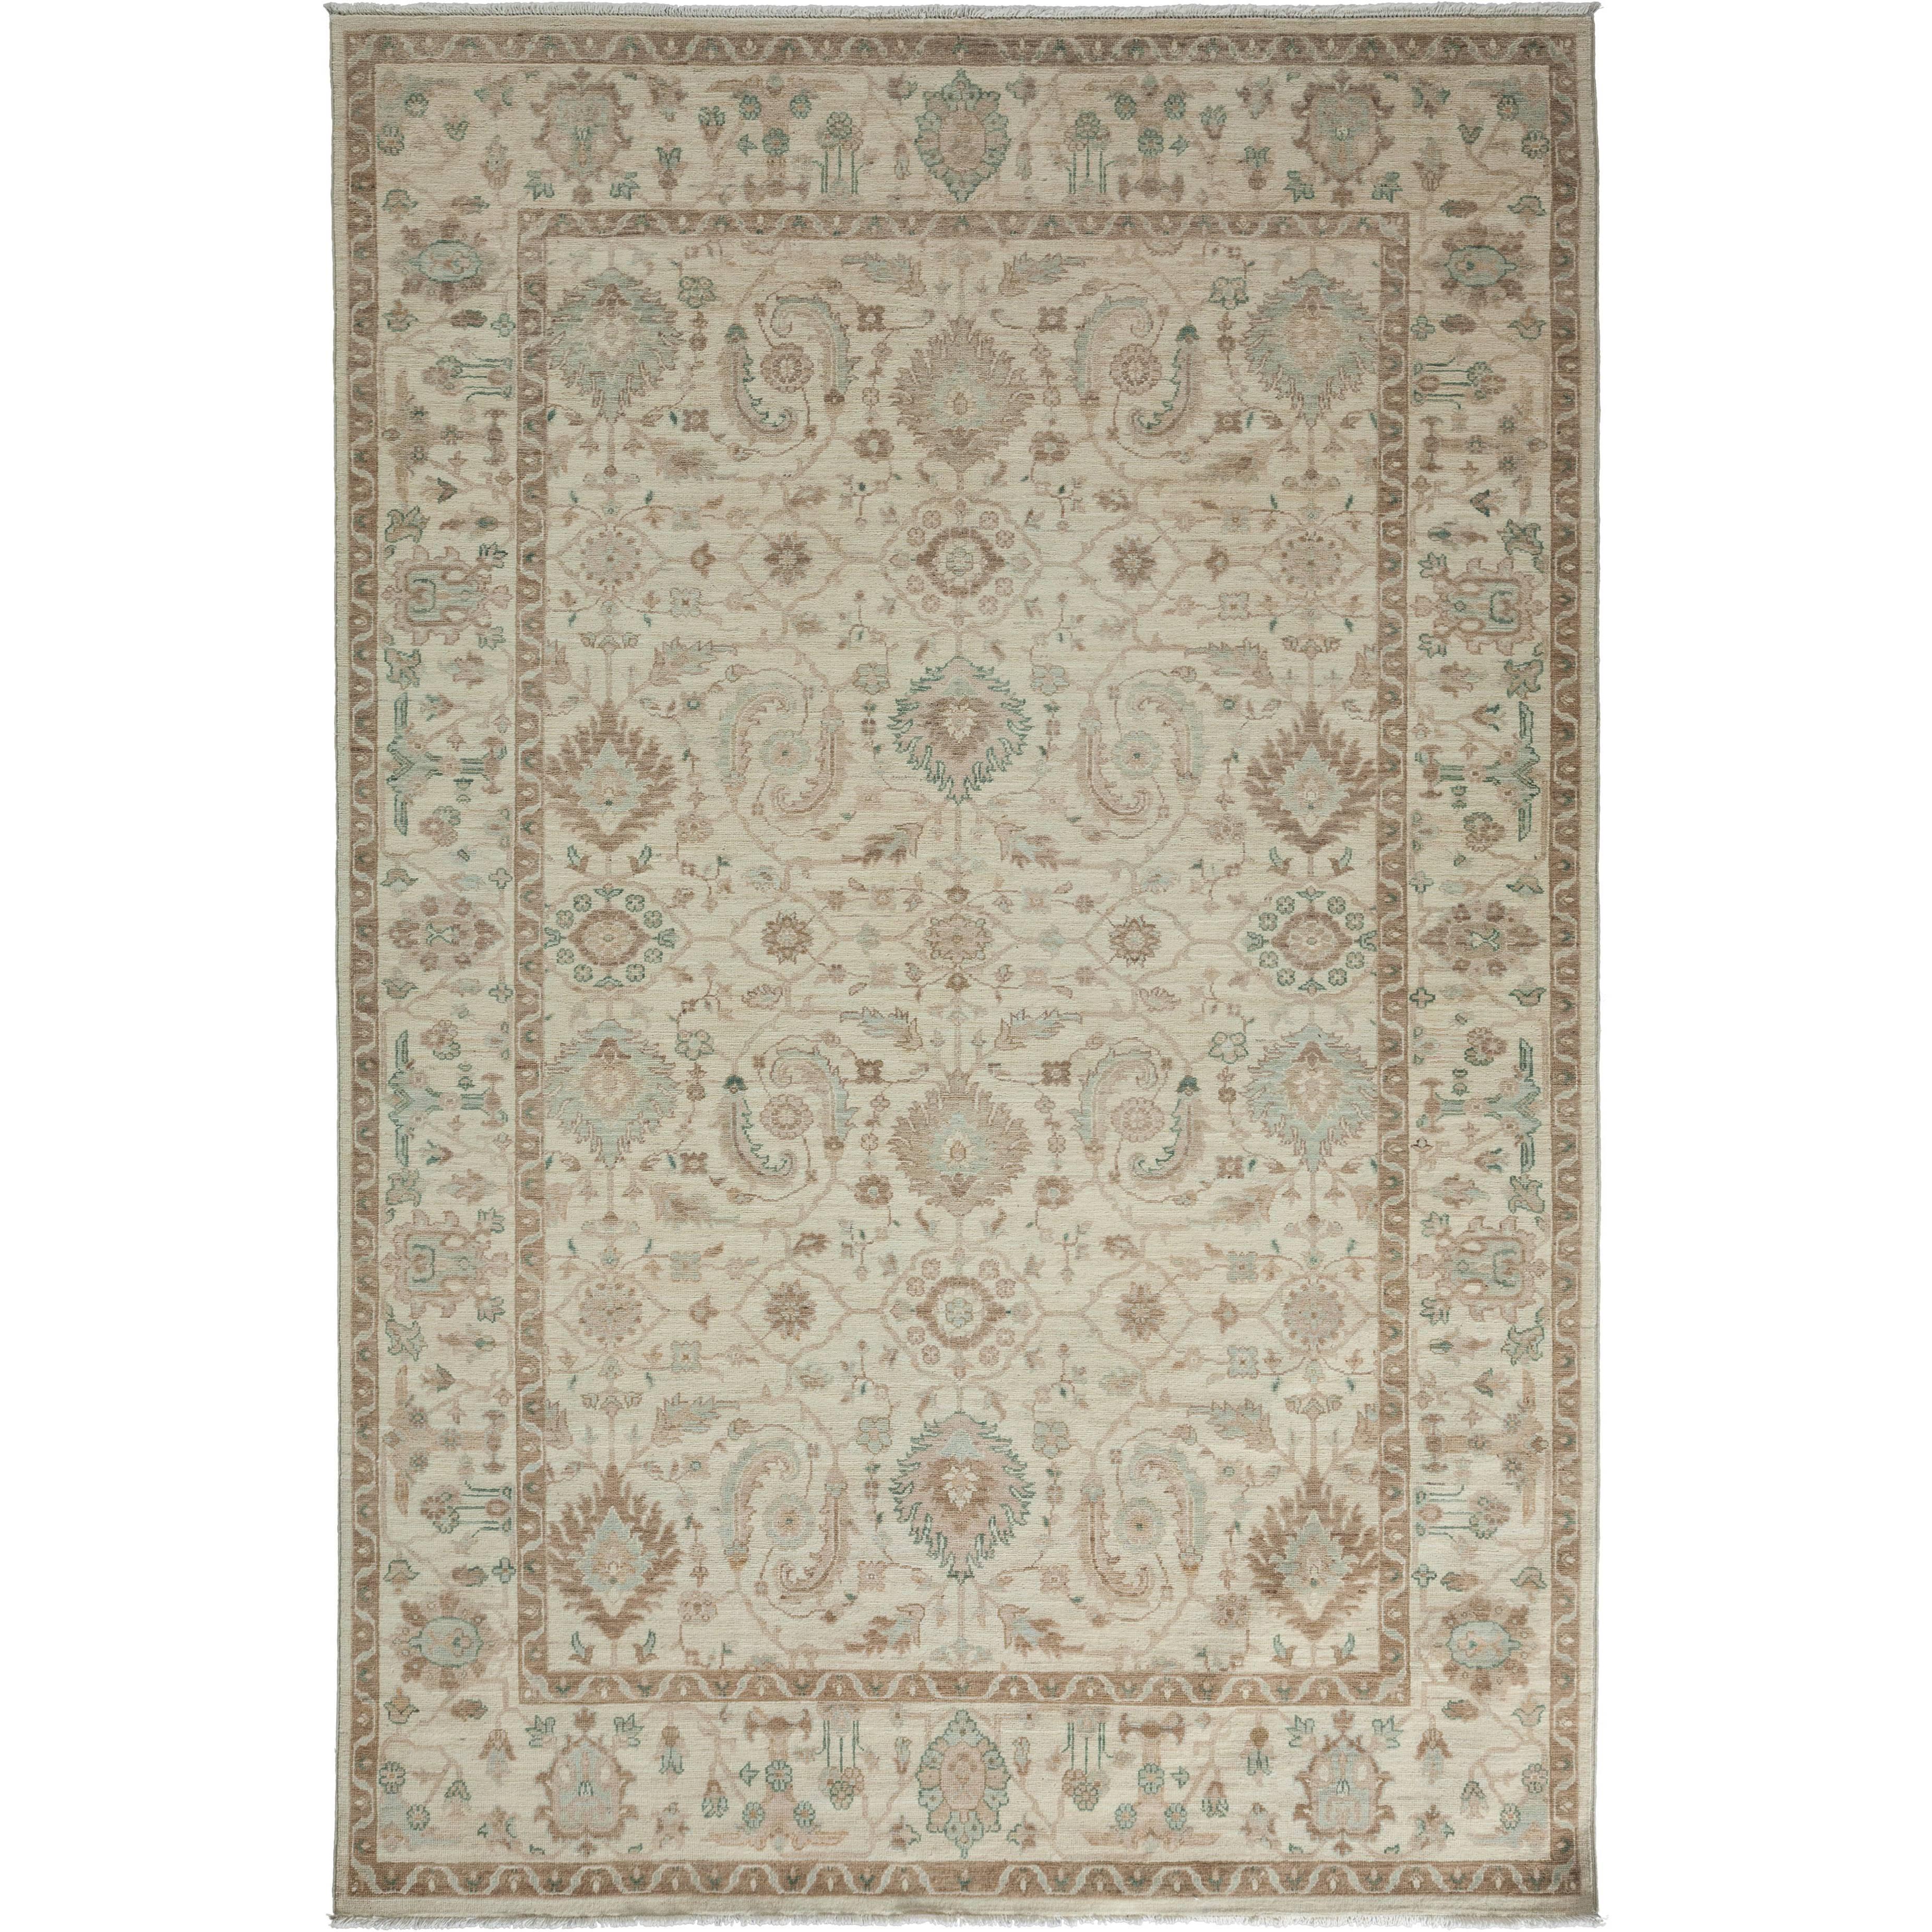 Oushak, Hand-Knotted Area Rug